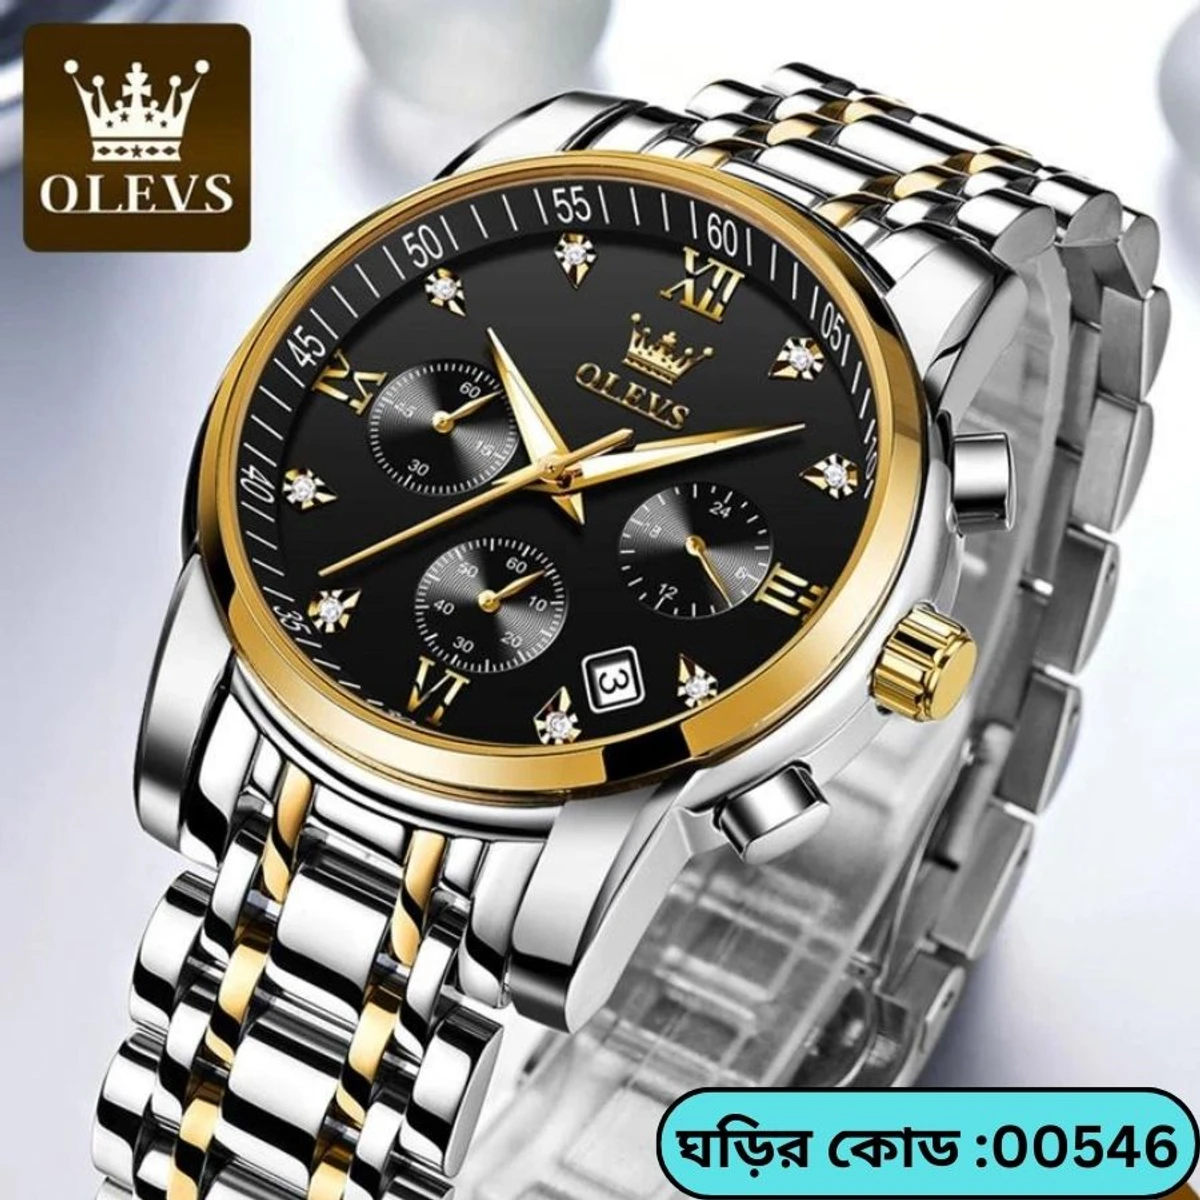 OLEVS MODEL 2858 Watch for Men Stainless Steel Watches - 2858 TOTON AR DIAL BLACK ROUND GOLDEN - MAN WATCH